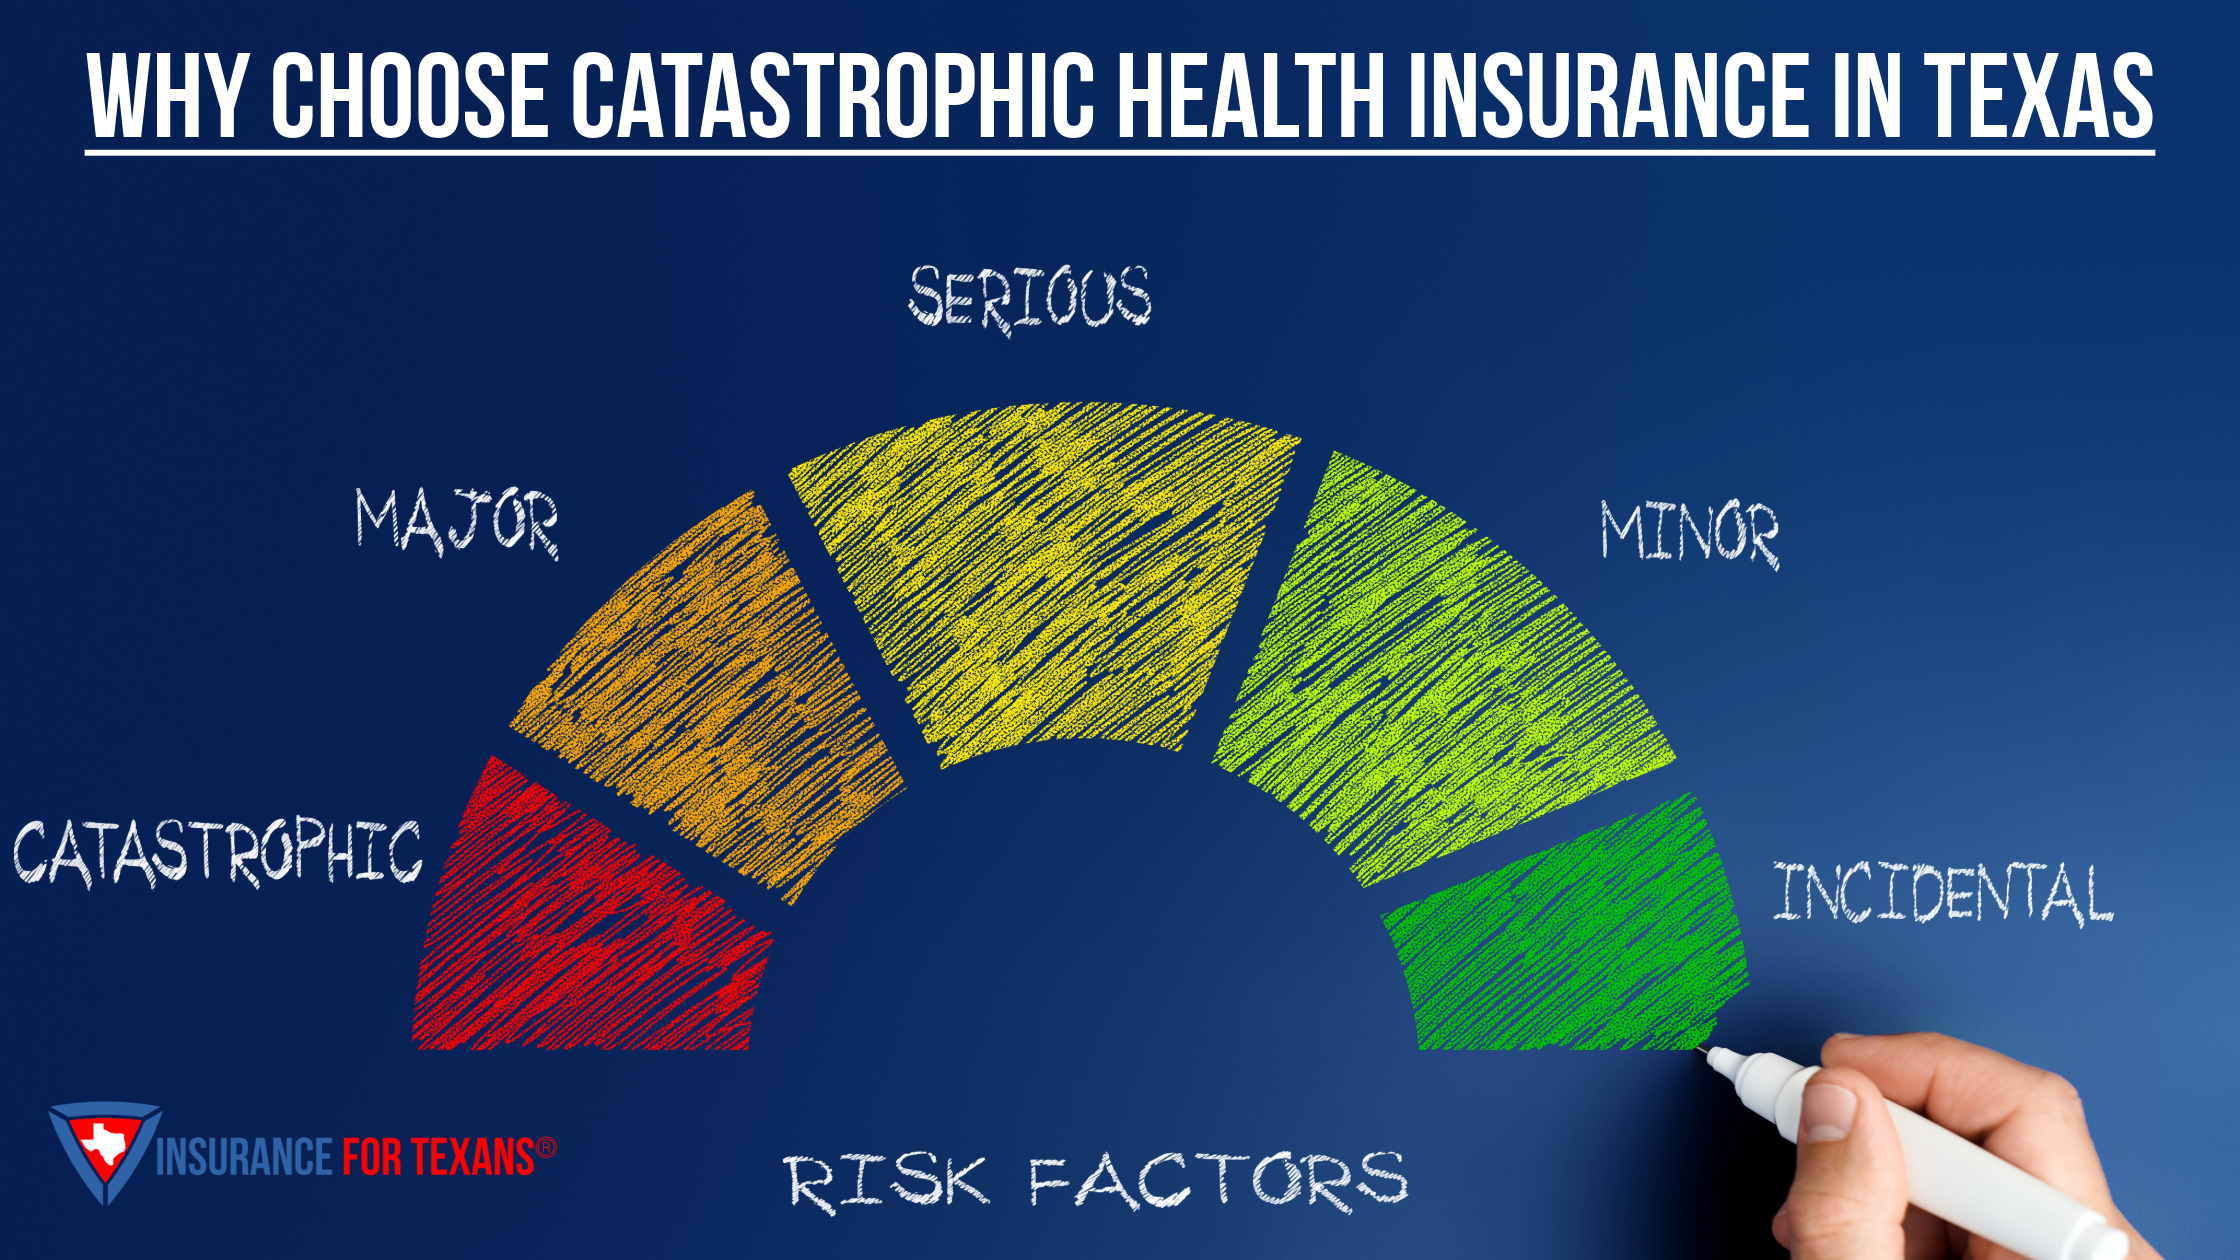 Why Choose Catastrophic Health Insurance in Texas